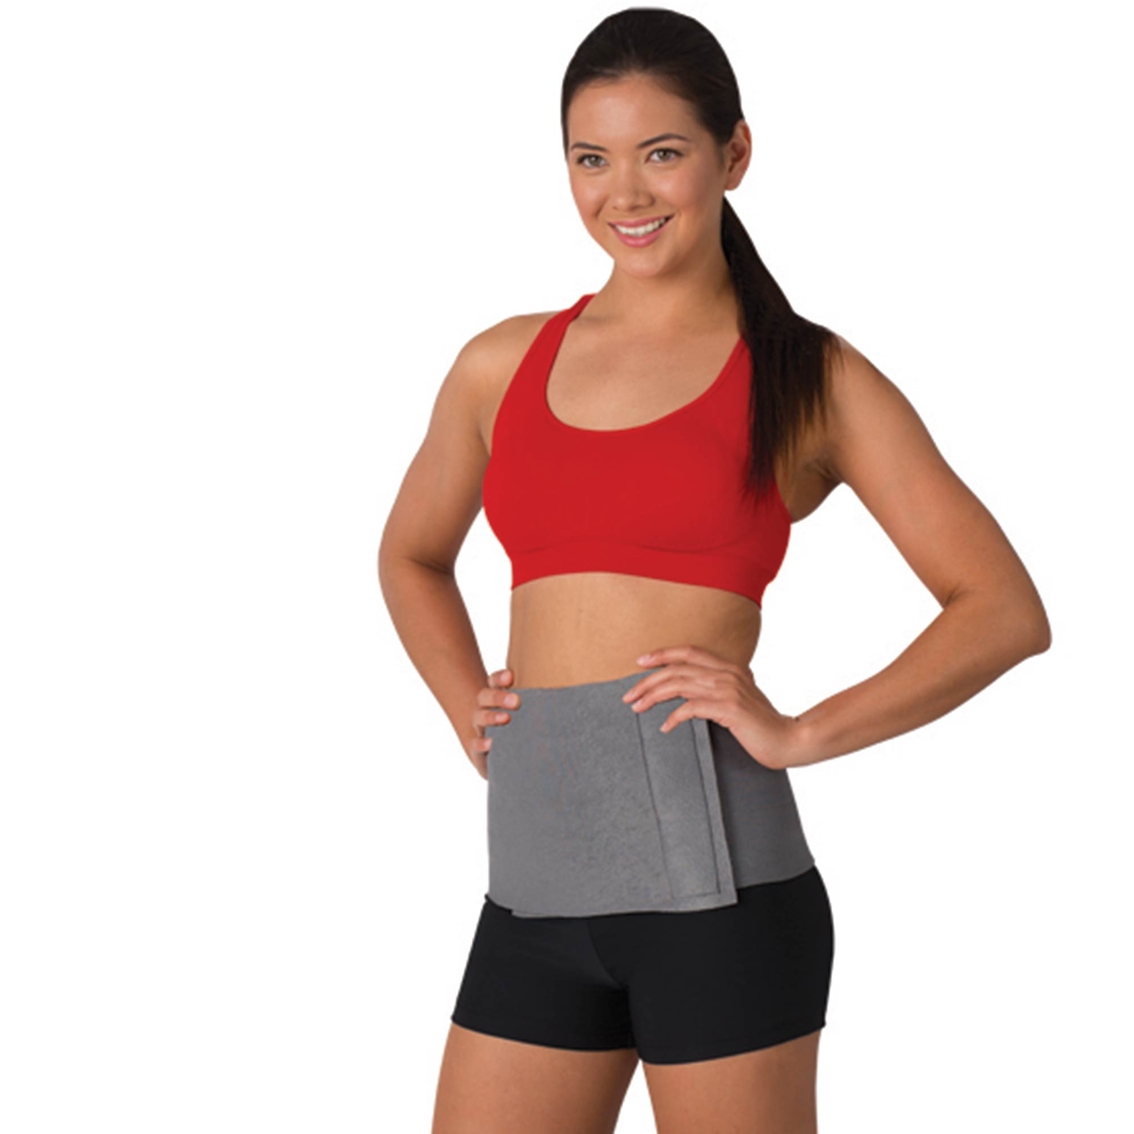 Bally Total Fitness Slimmer Belt With Magnets, Fitness Accessories, Sports & Outdoors